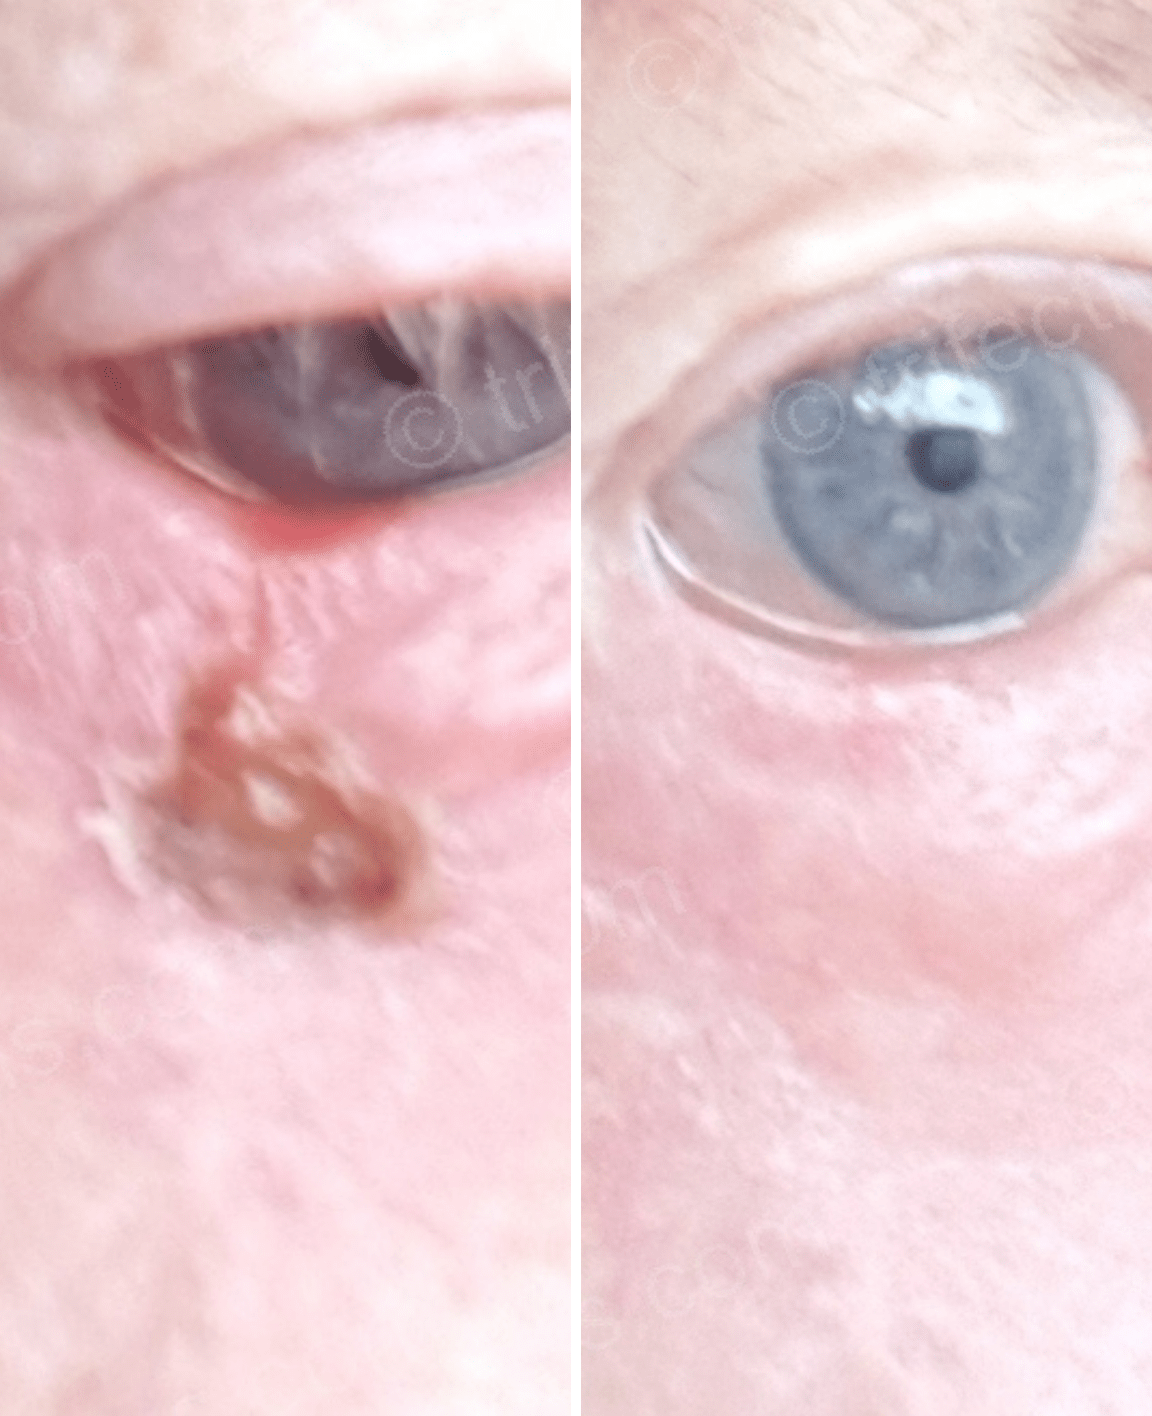 The use of hypochlorous acid in an irradiation ulcer of the lower eyelid